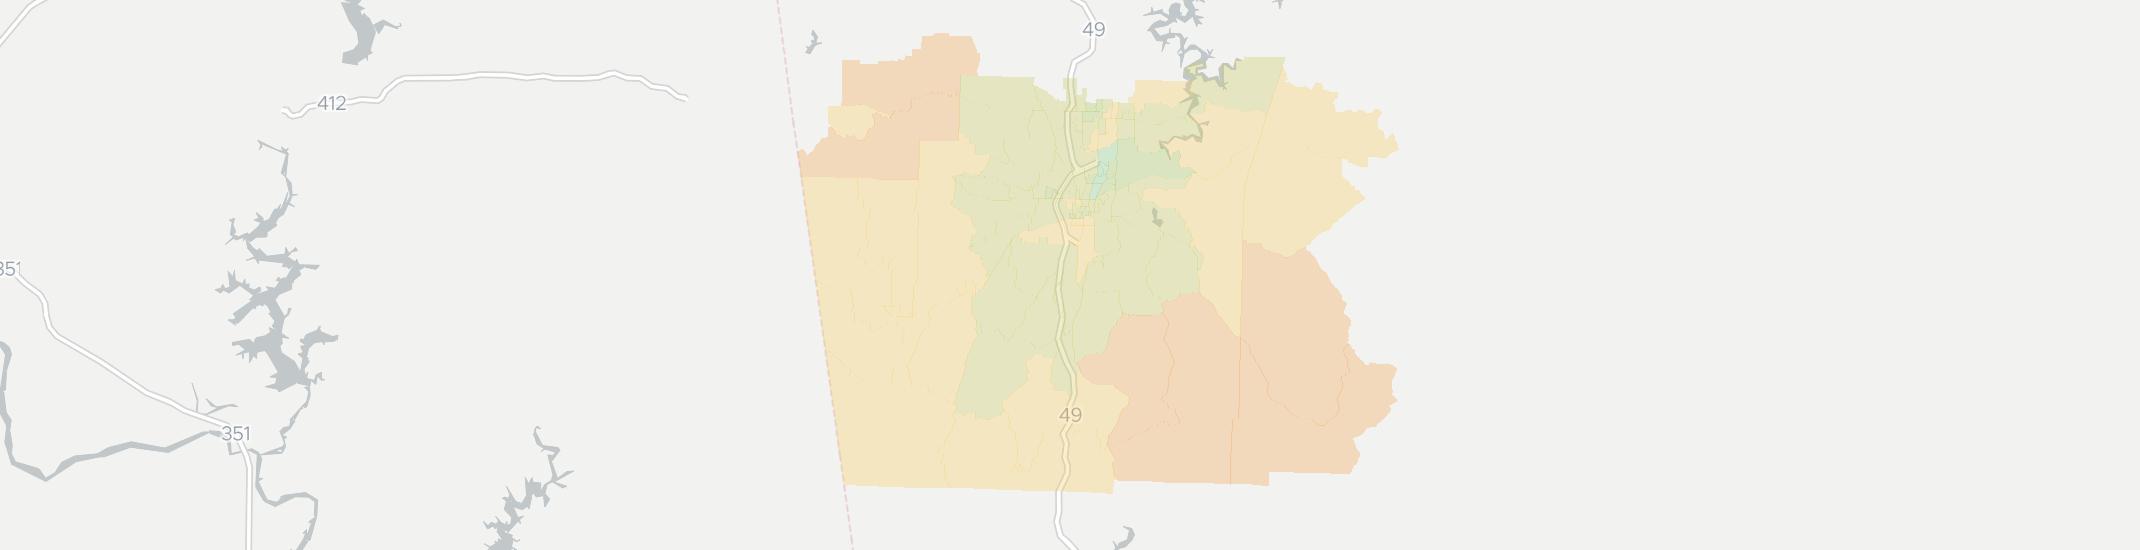 Fayetteville Internet Competition Map. Click for interactive map.